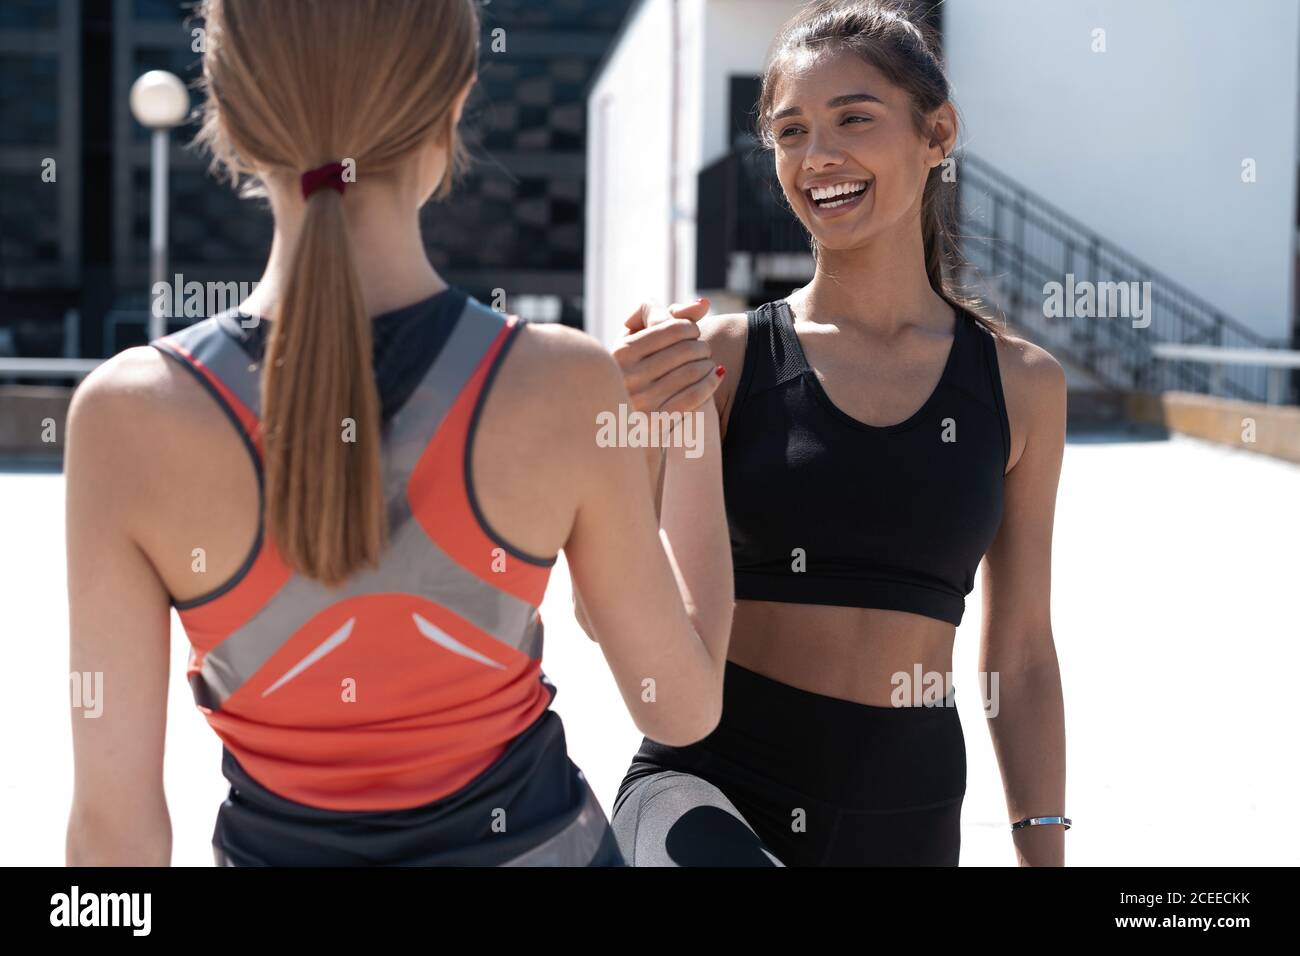 Two cheerful women in fitness wear giving high five while running in the city Stock Photo